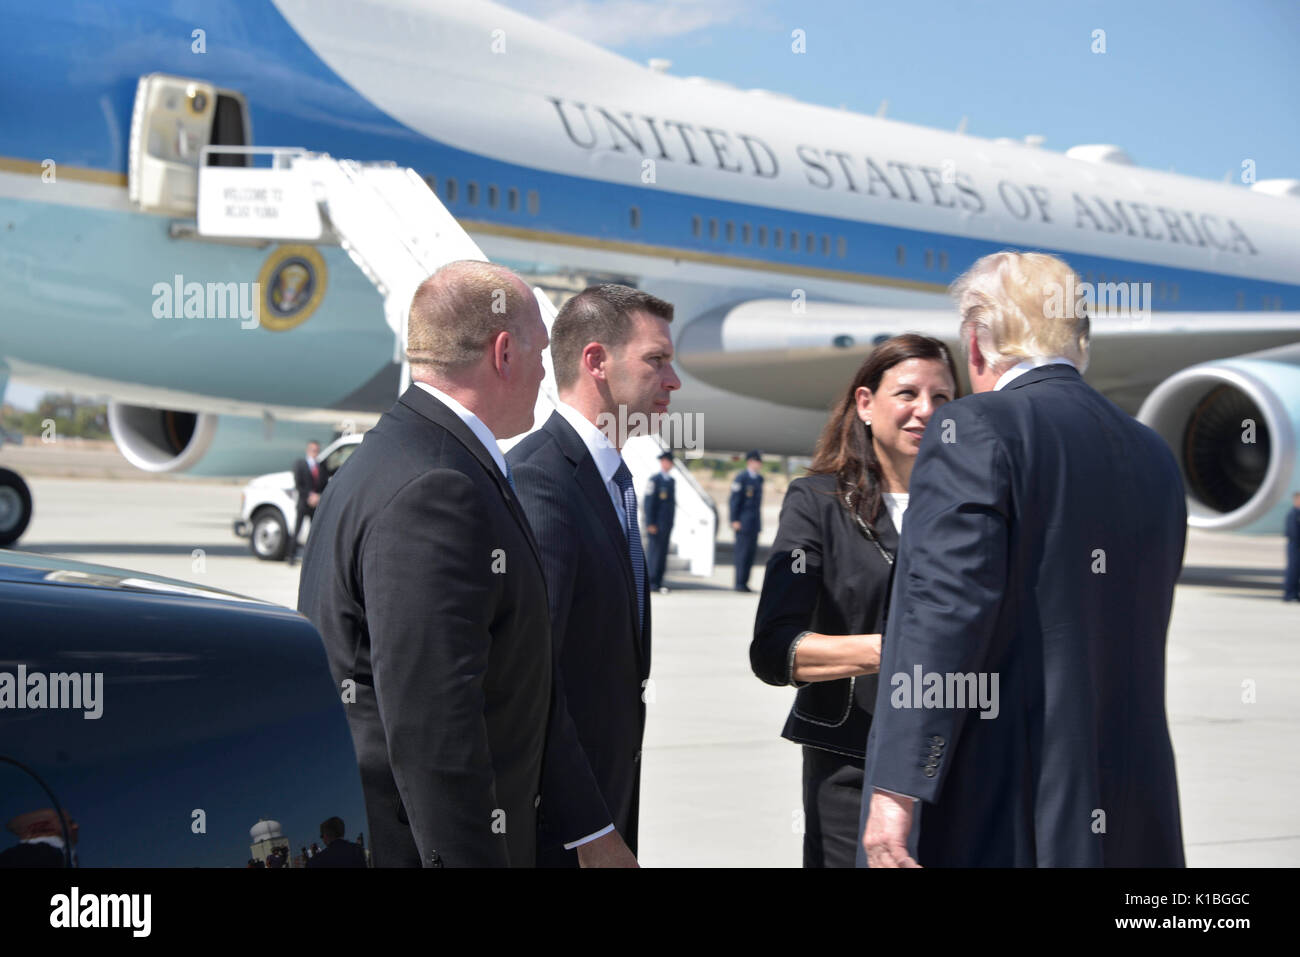 U.S. President Donald Trump, right, is welcomed by Homeland Security Acting Secretary Elaine Duke as Acting Customs and Border Patrol Commissioner Kevin McAleenan, center, and Acting CBP Director Tom Homan look on as he arrives for a tour of the Yuma Border Patrol Station August 22, 2017 in Yuma, Arizona. Stock Photo